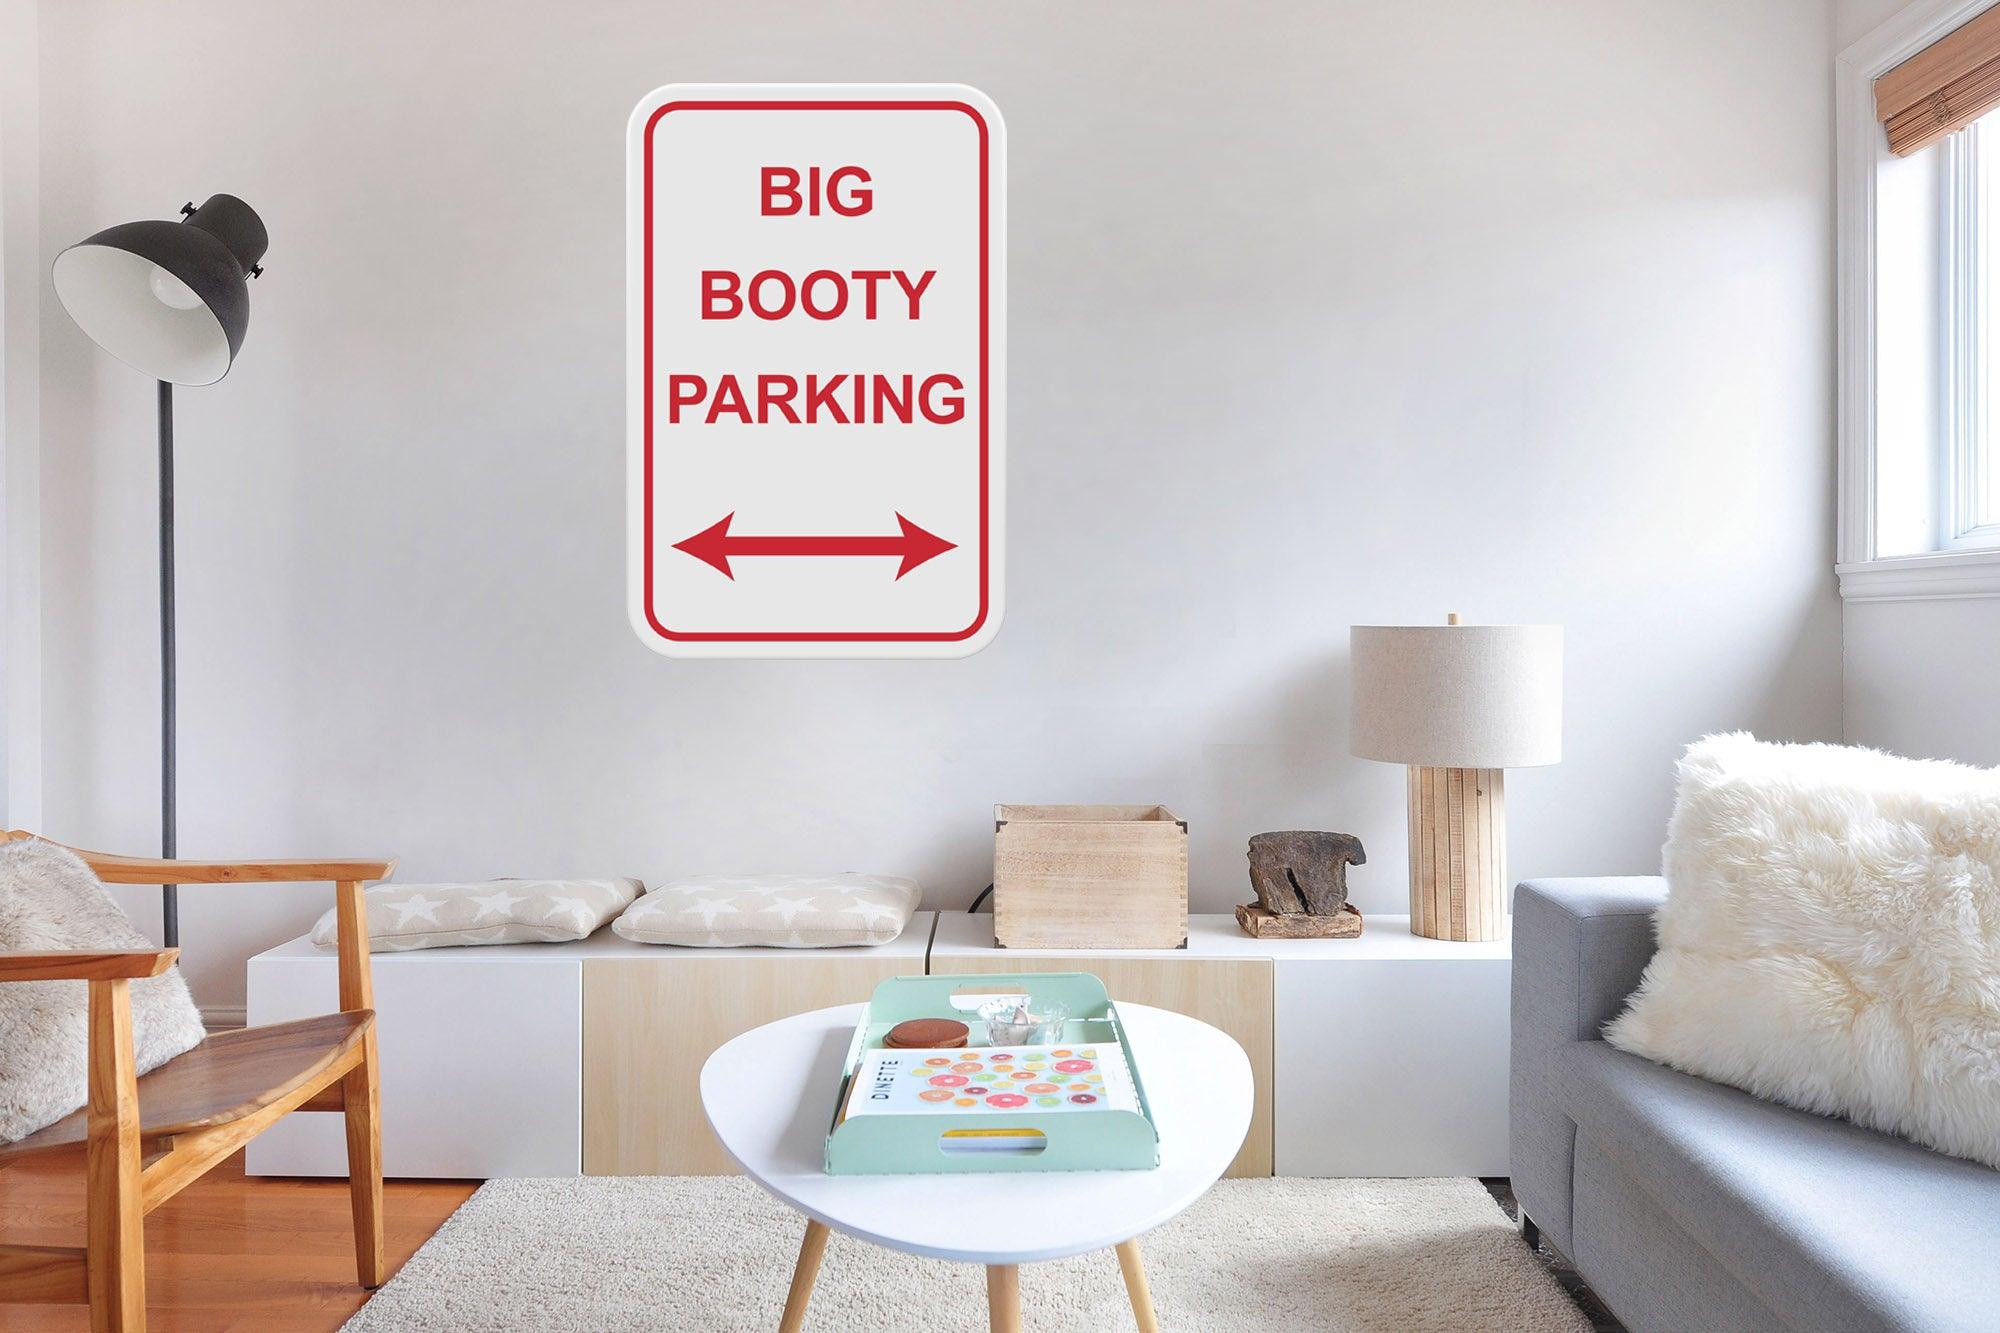 Big Booty Parking Decal, Removable Sticker Wall Decal